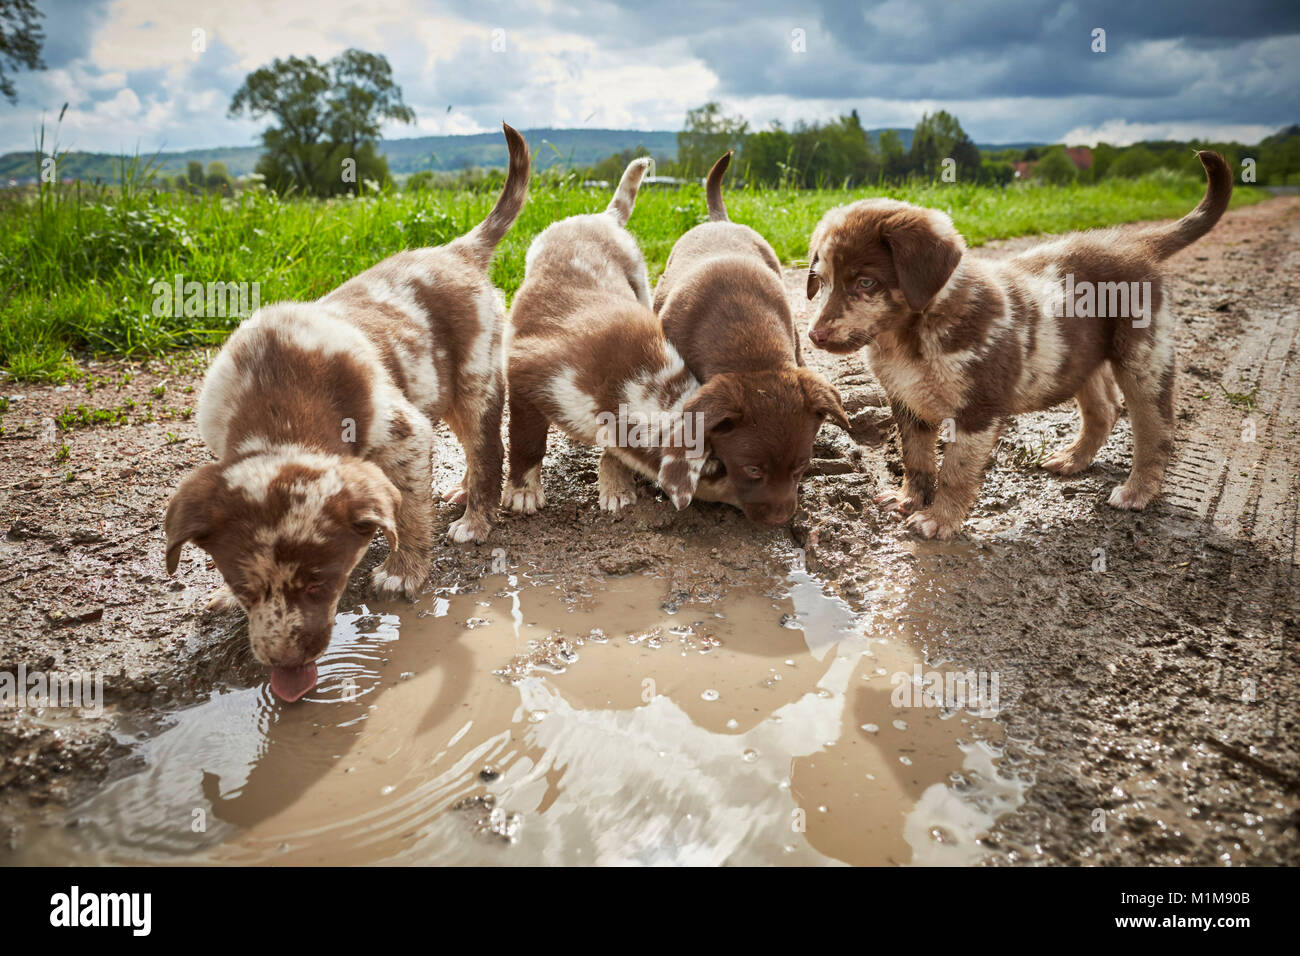 Mixed-breed dog. Five puppies on a puddle. Germany Stock Photo